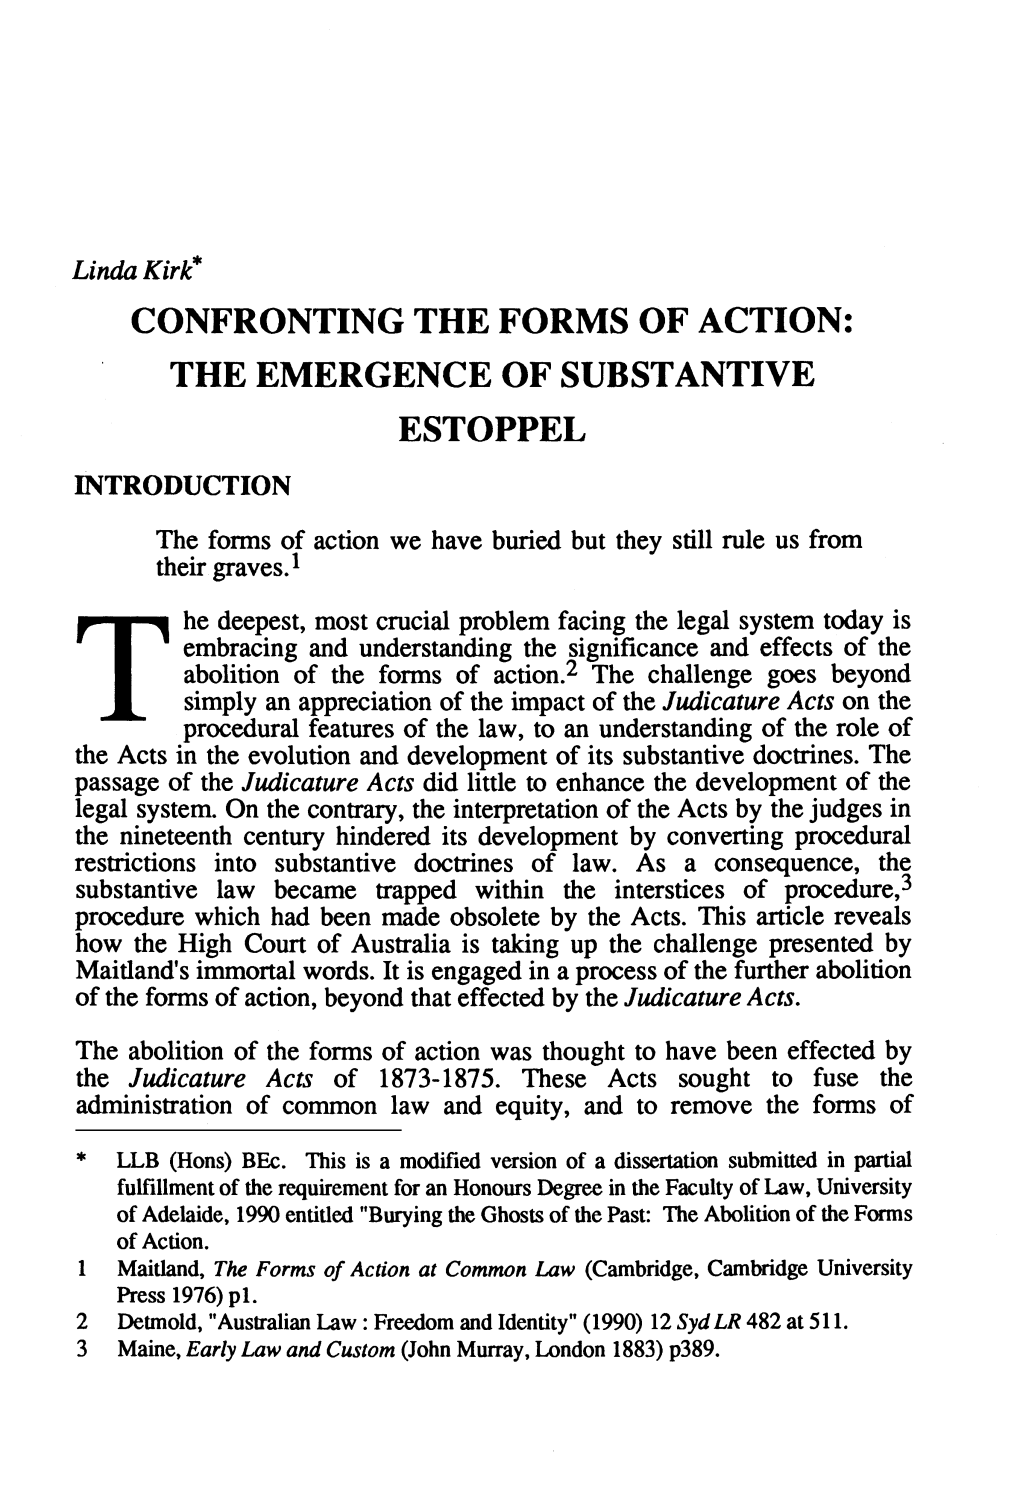 Confronting the Forms of Action: the Emergence of Substantive Estoppel Introduction